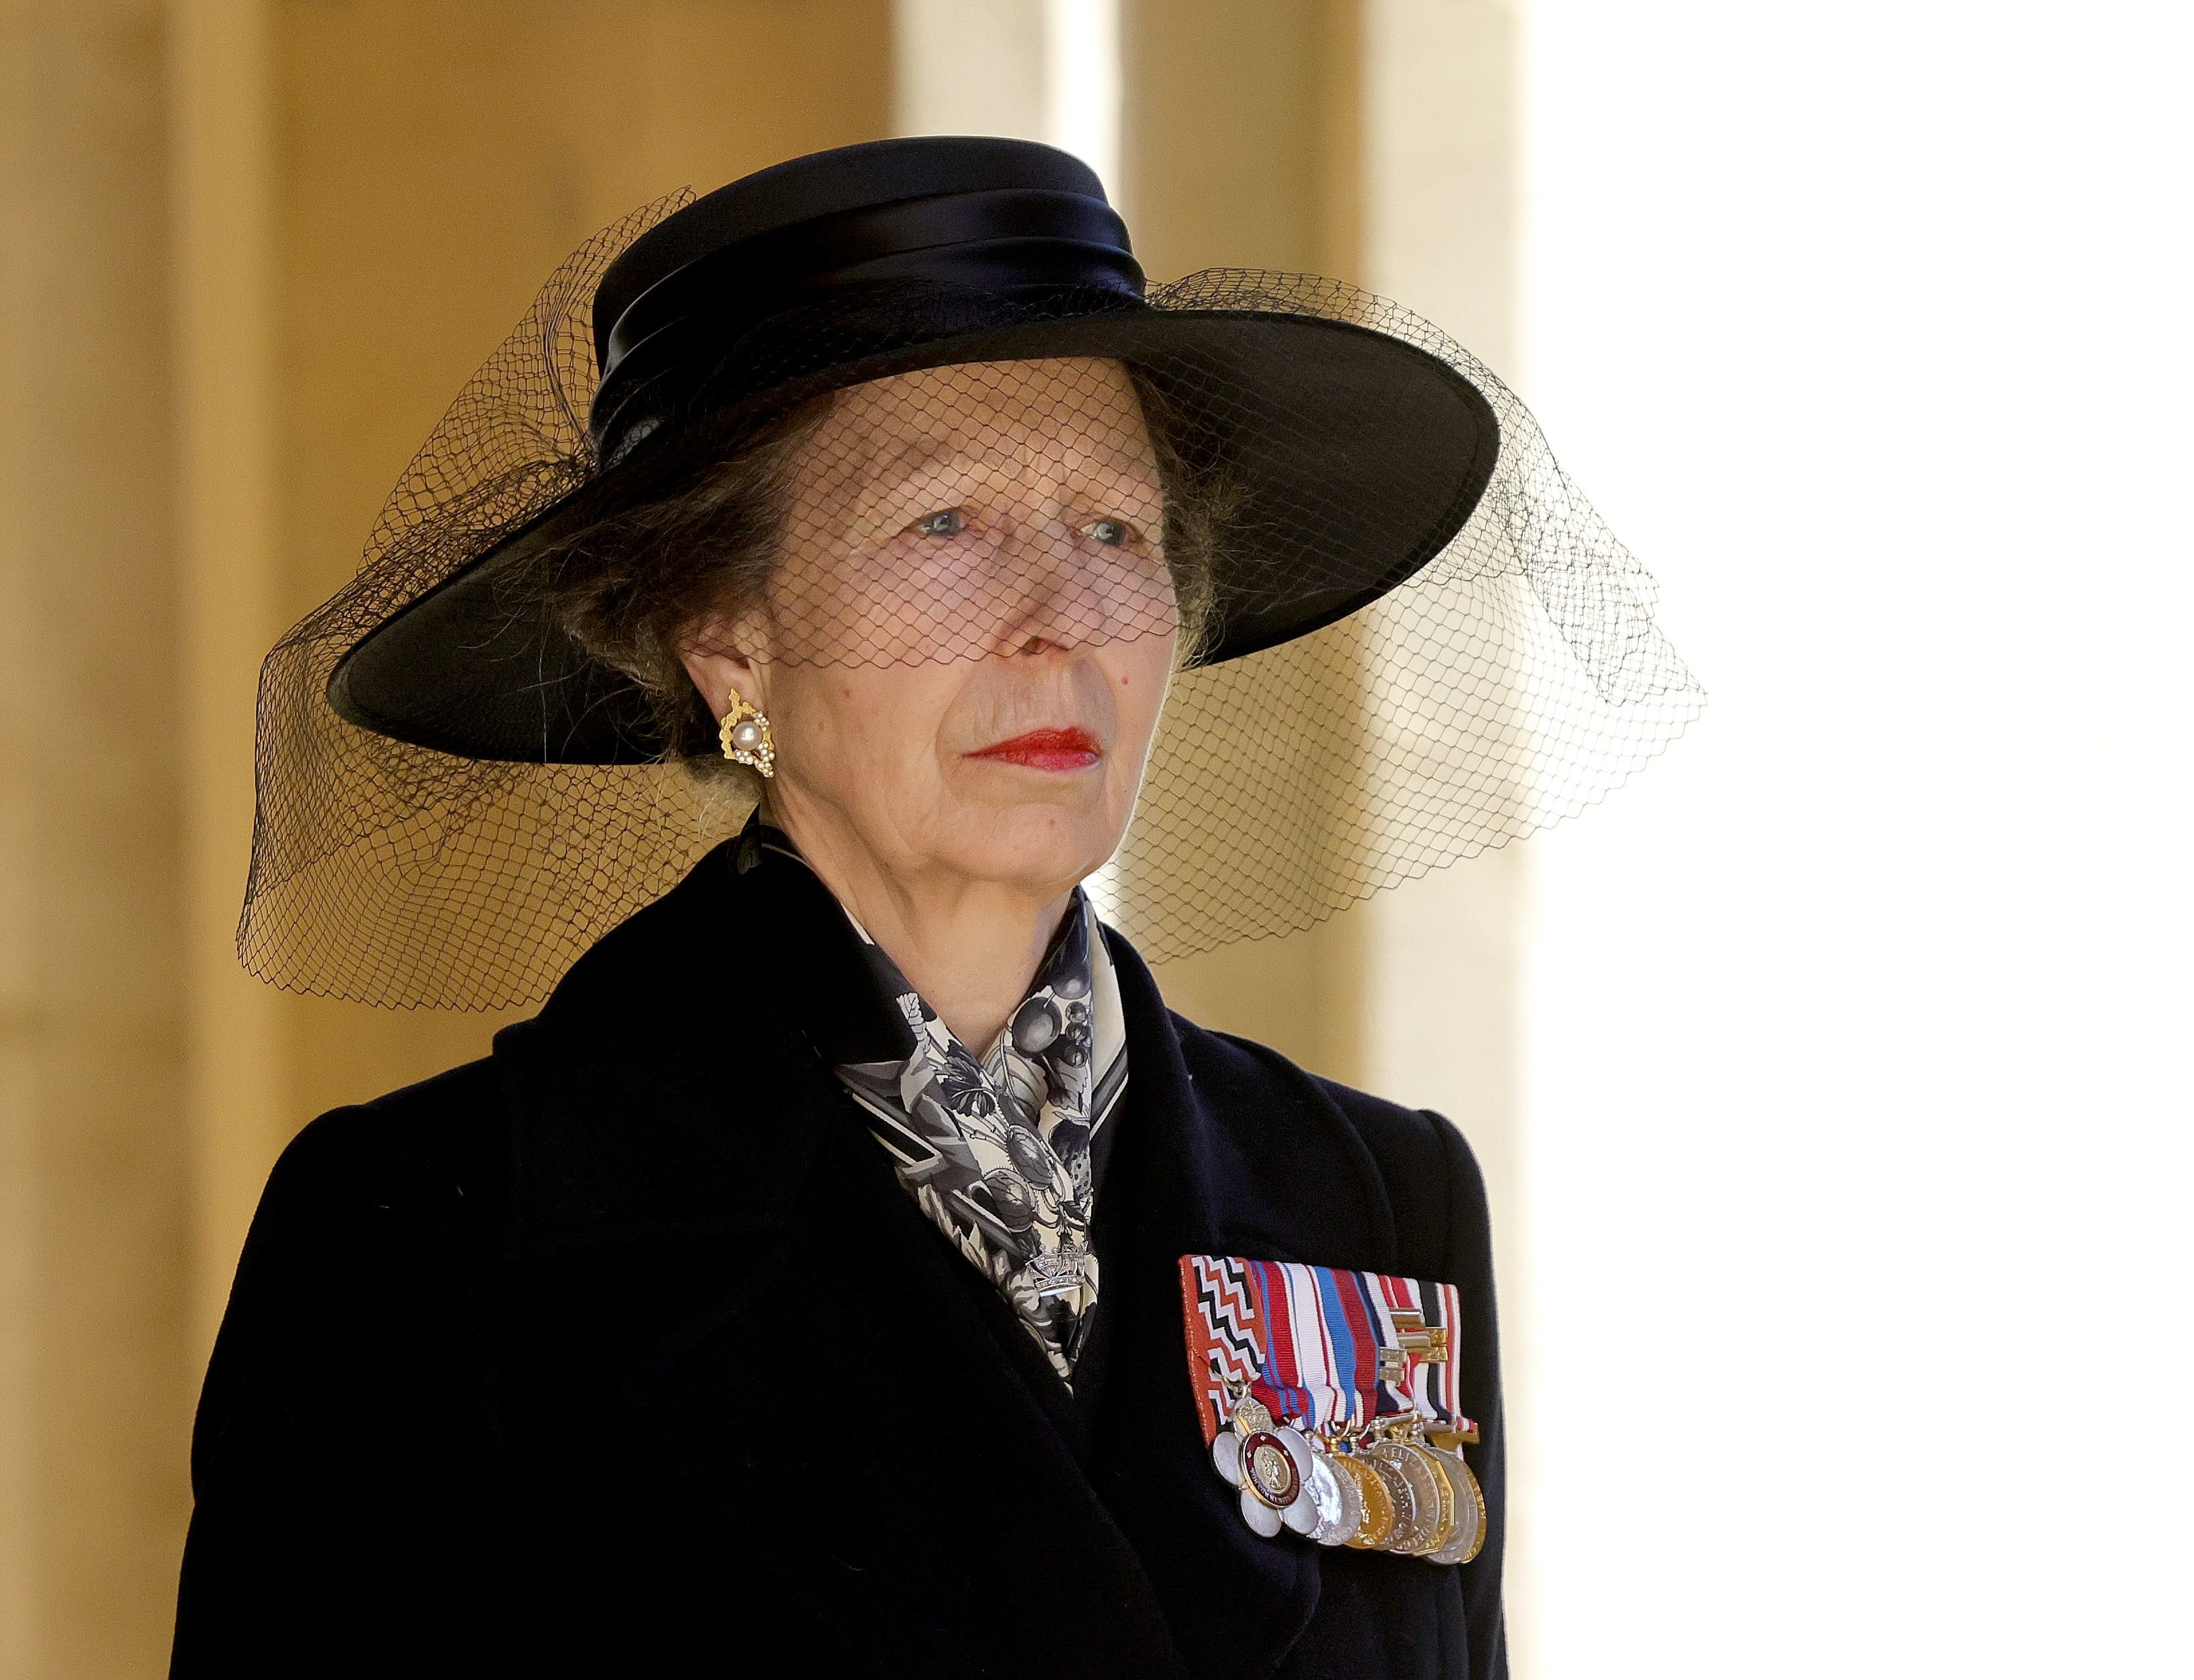 Princess Anne at the Ceremonial Procession during the funeral of Prince Philip at Windsor Castle on April 17, 2021 | Source: Getty Images